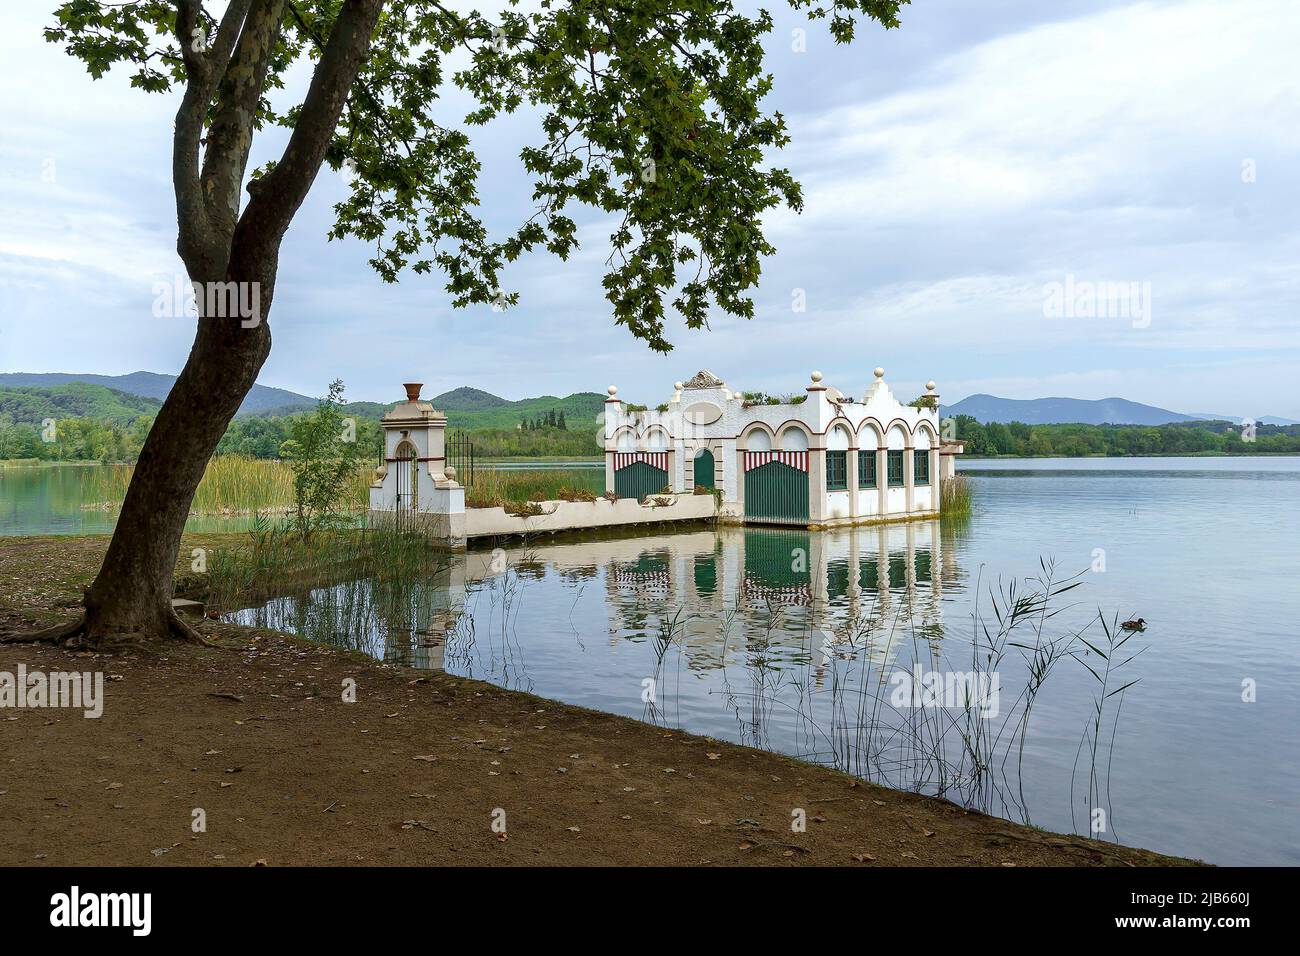 Indian house with dock on Lake Banyoles. Stock Photo